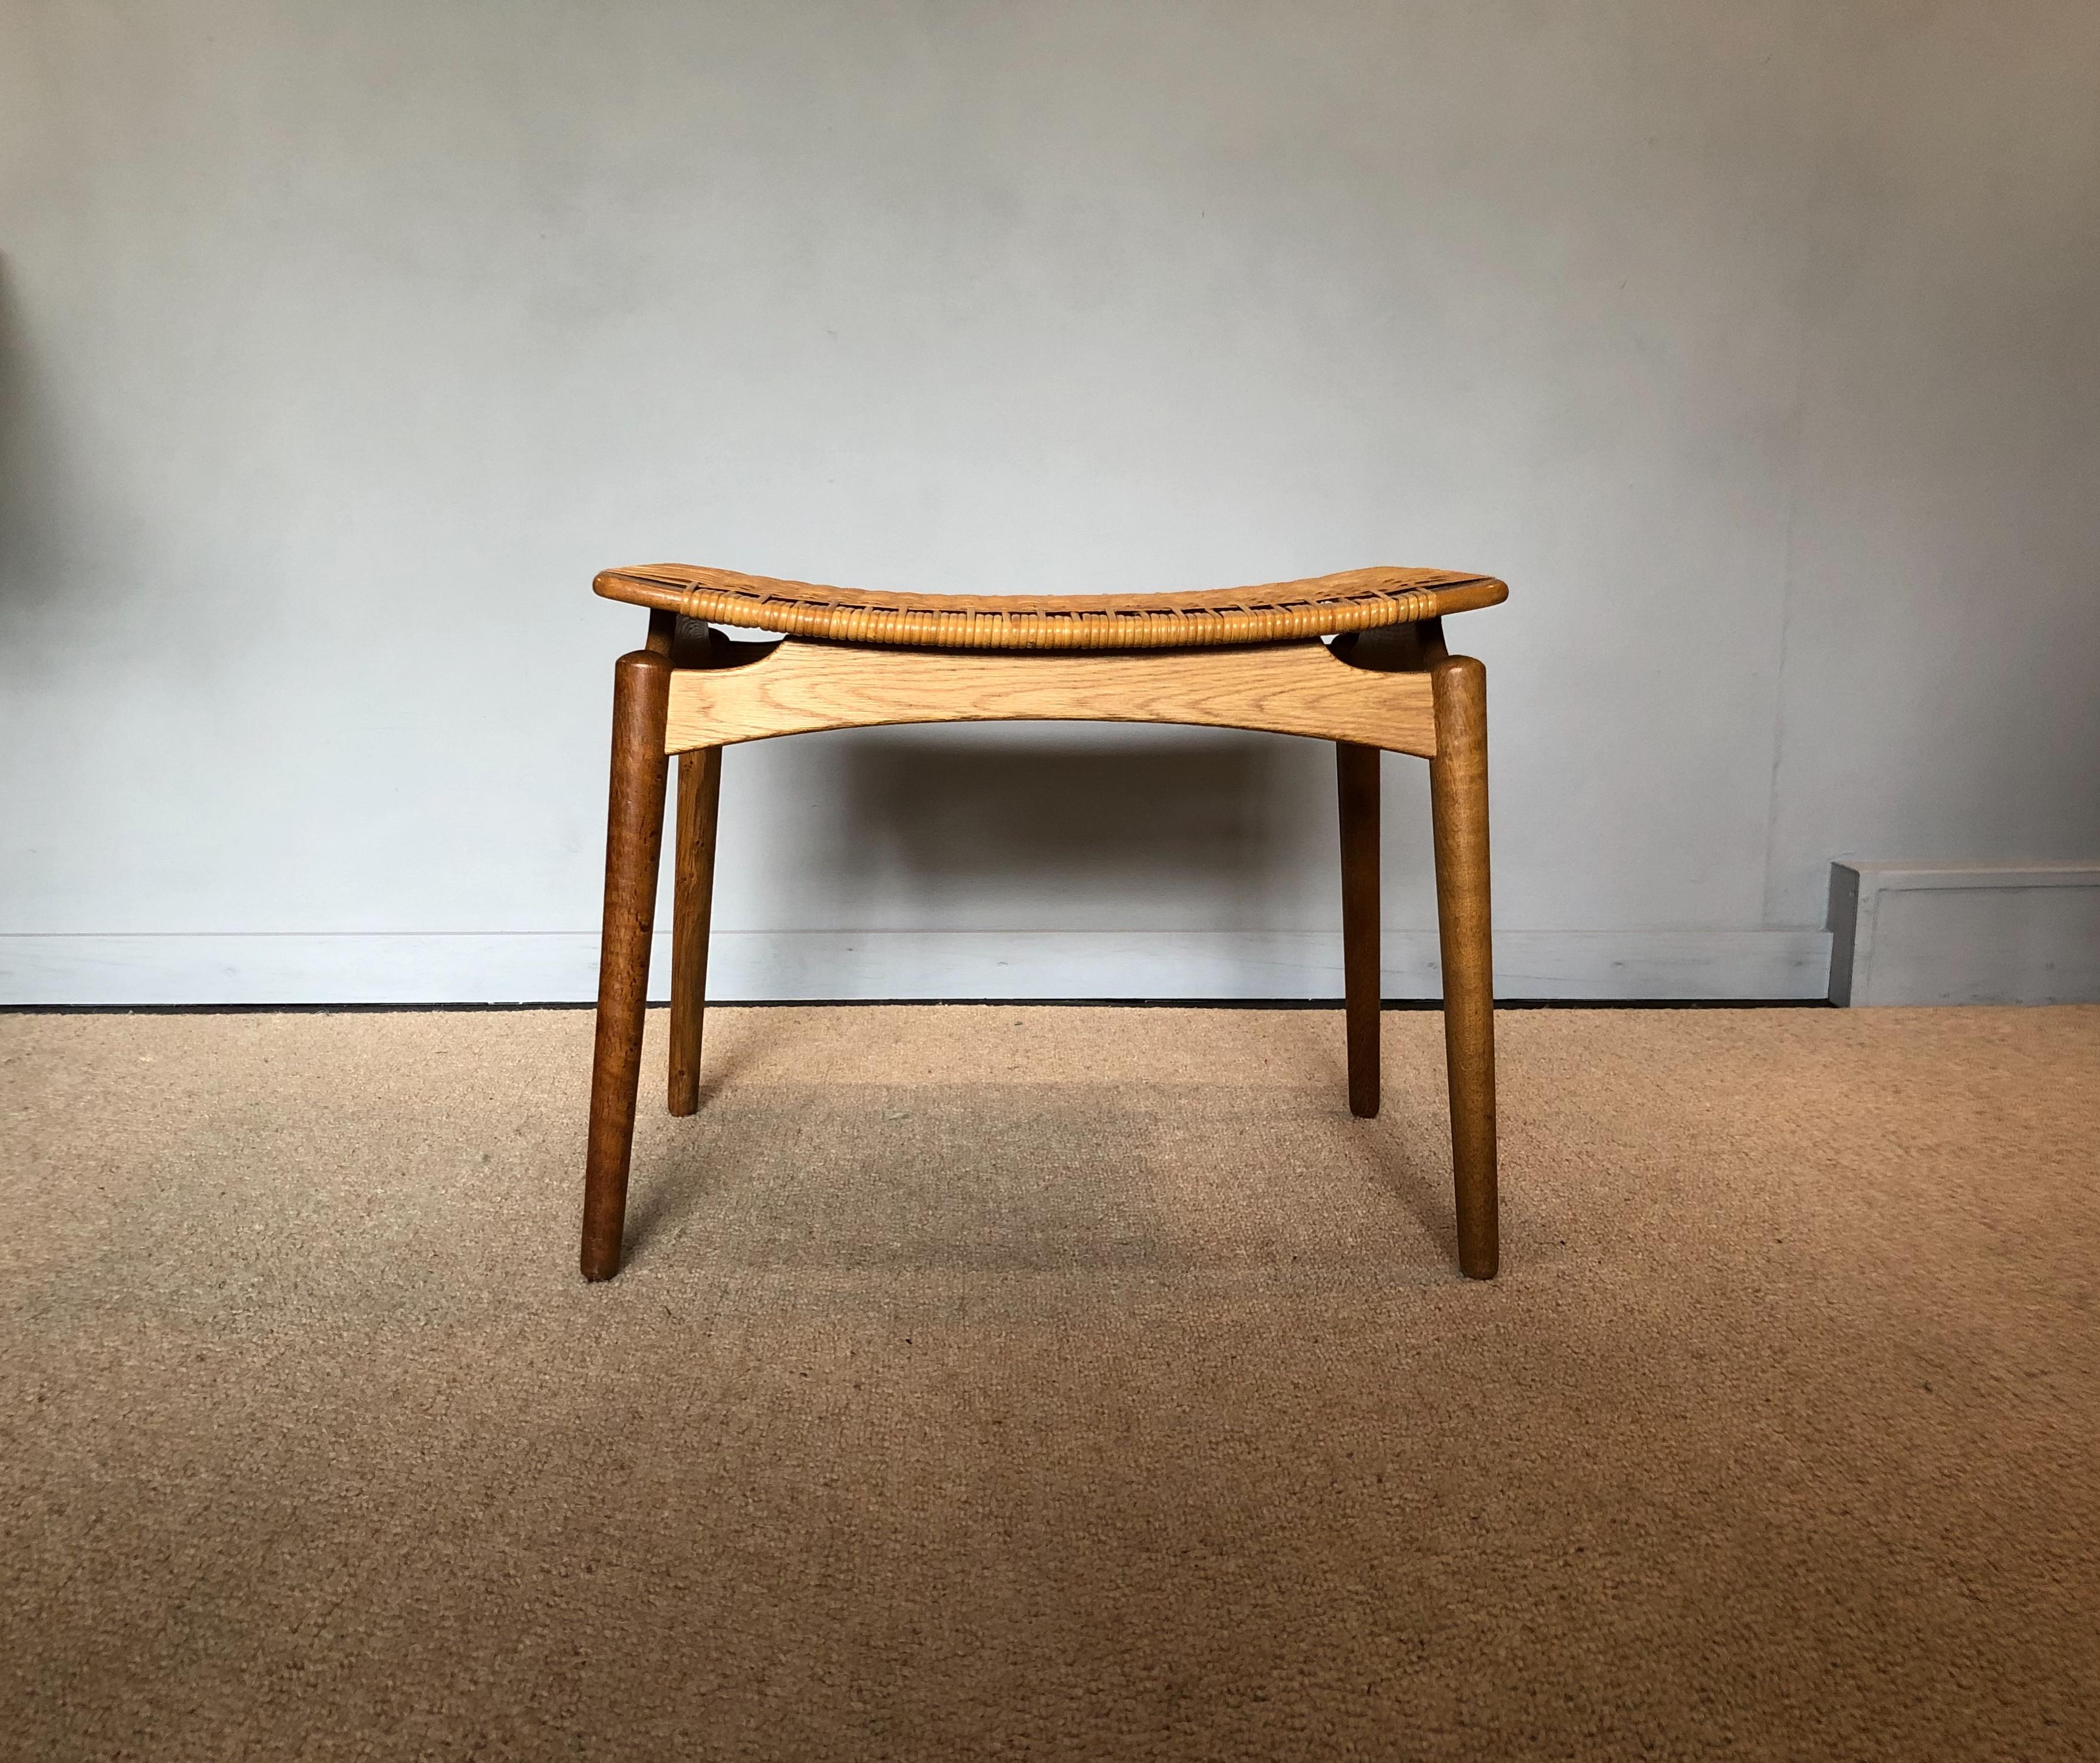 Incredibly elegant oak and cane Midcentury Danish stools by renowned designer Finn Juhl for Niels Vodder. Wonderful pieces. Produced in the late 1950s-1960s. The cane weave can be changed and reupholstered by us if a different fabric or Leather